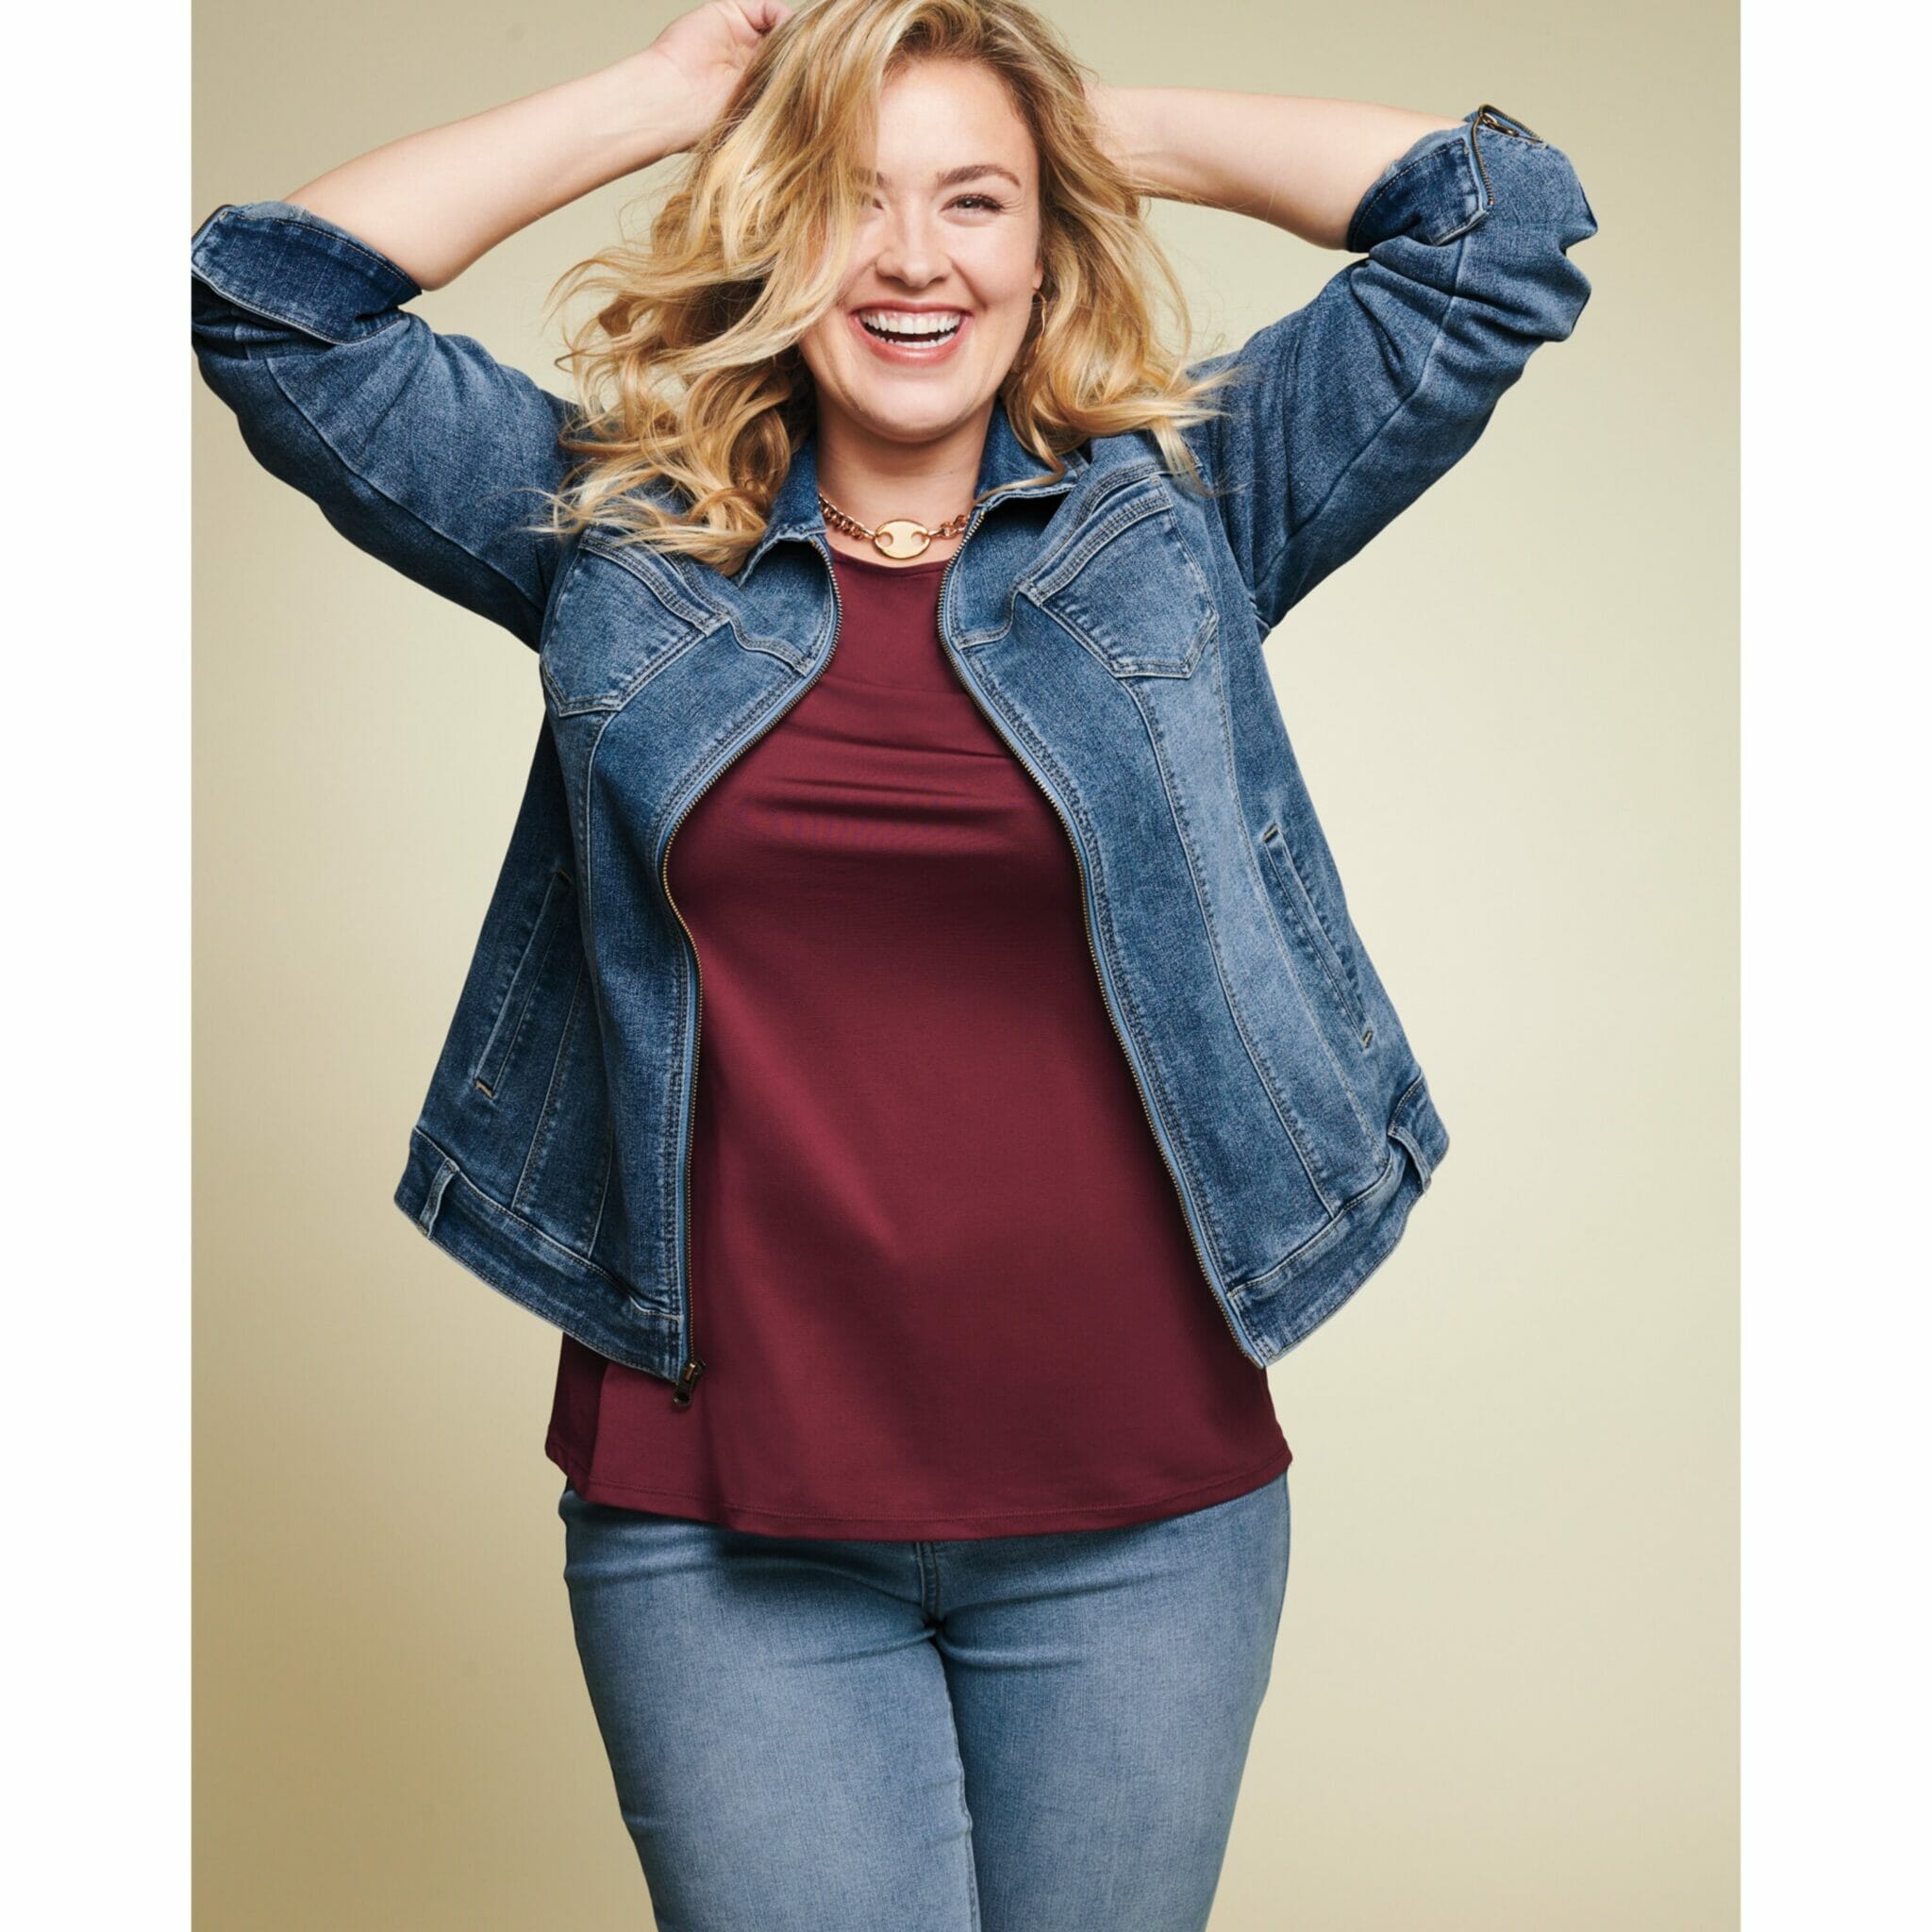 plus size blonde model wearing a jean jacket, burgundy shirt, and jeans